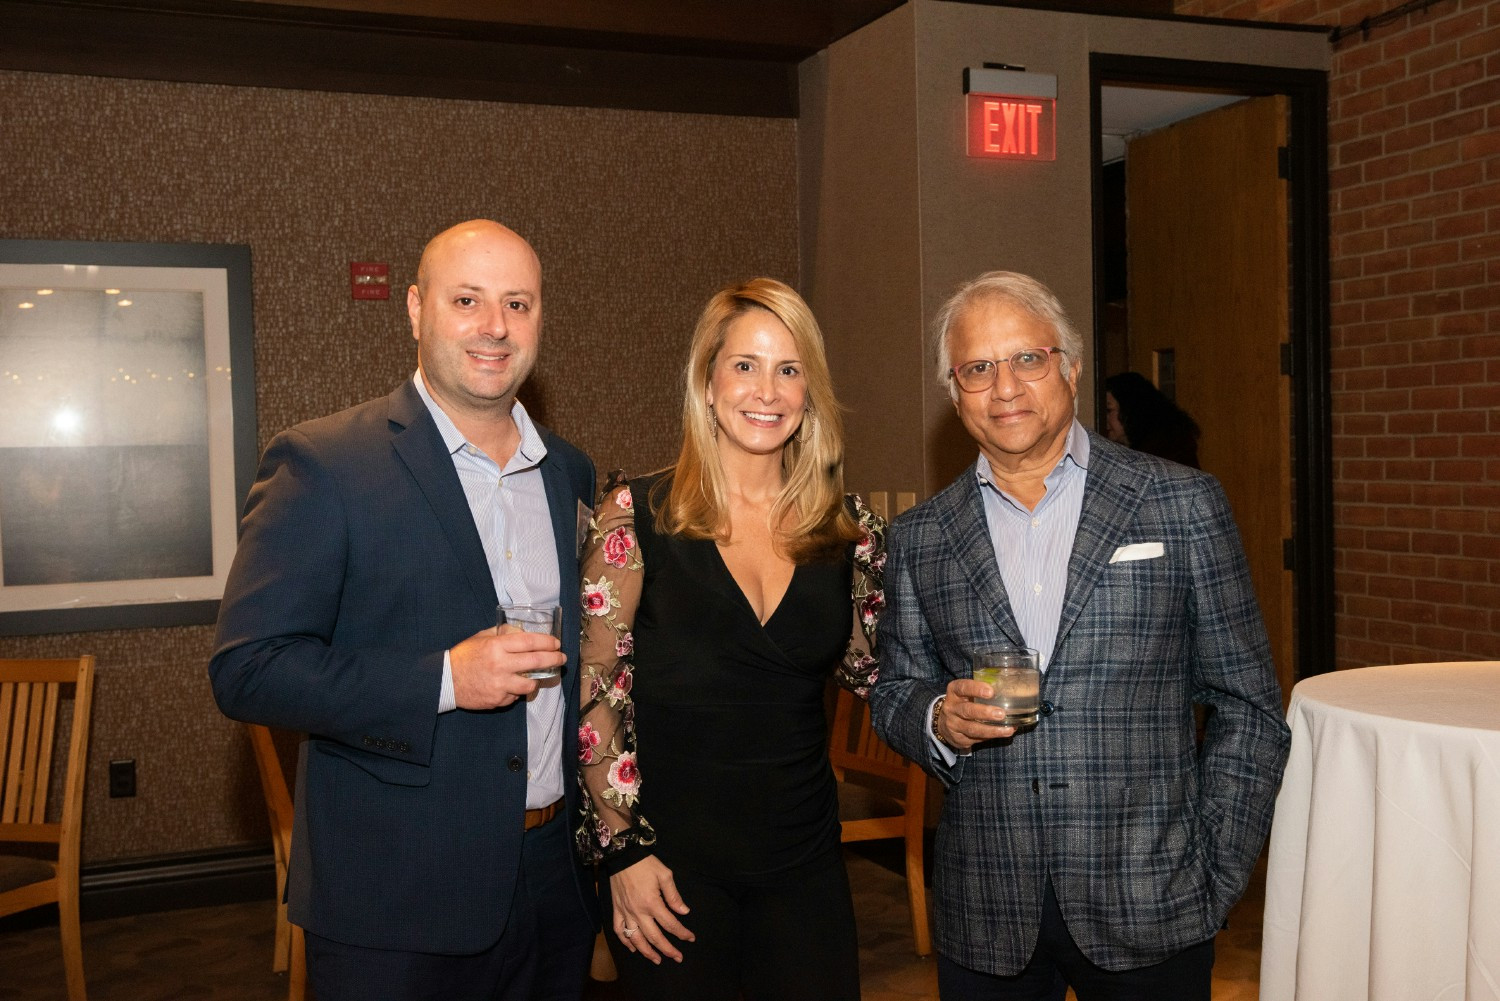 Roy Chowdhury, our Founder and CEO, with Shawn Cohen and his lovely wife Danielle. 